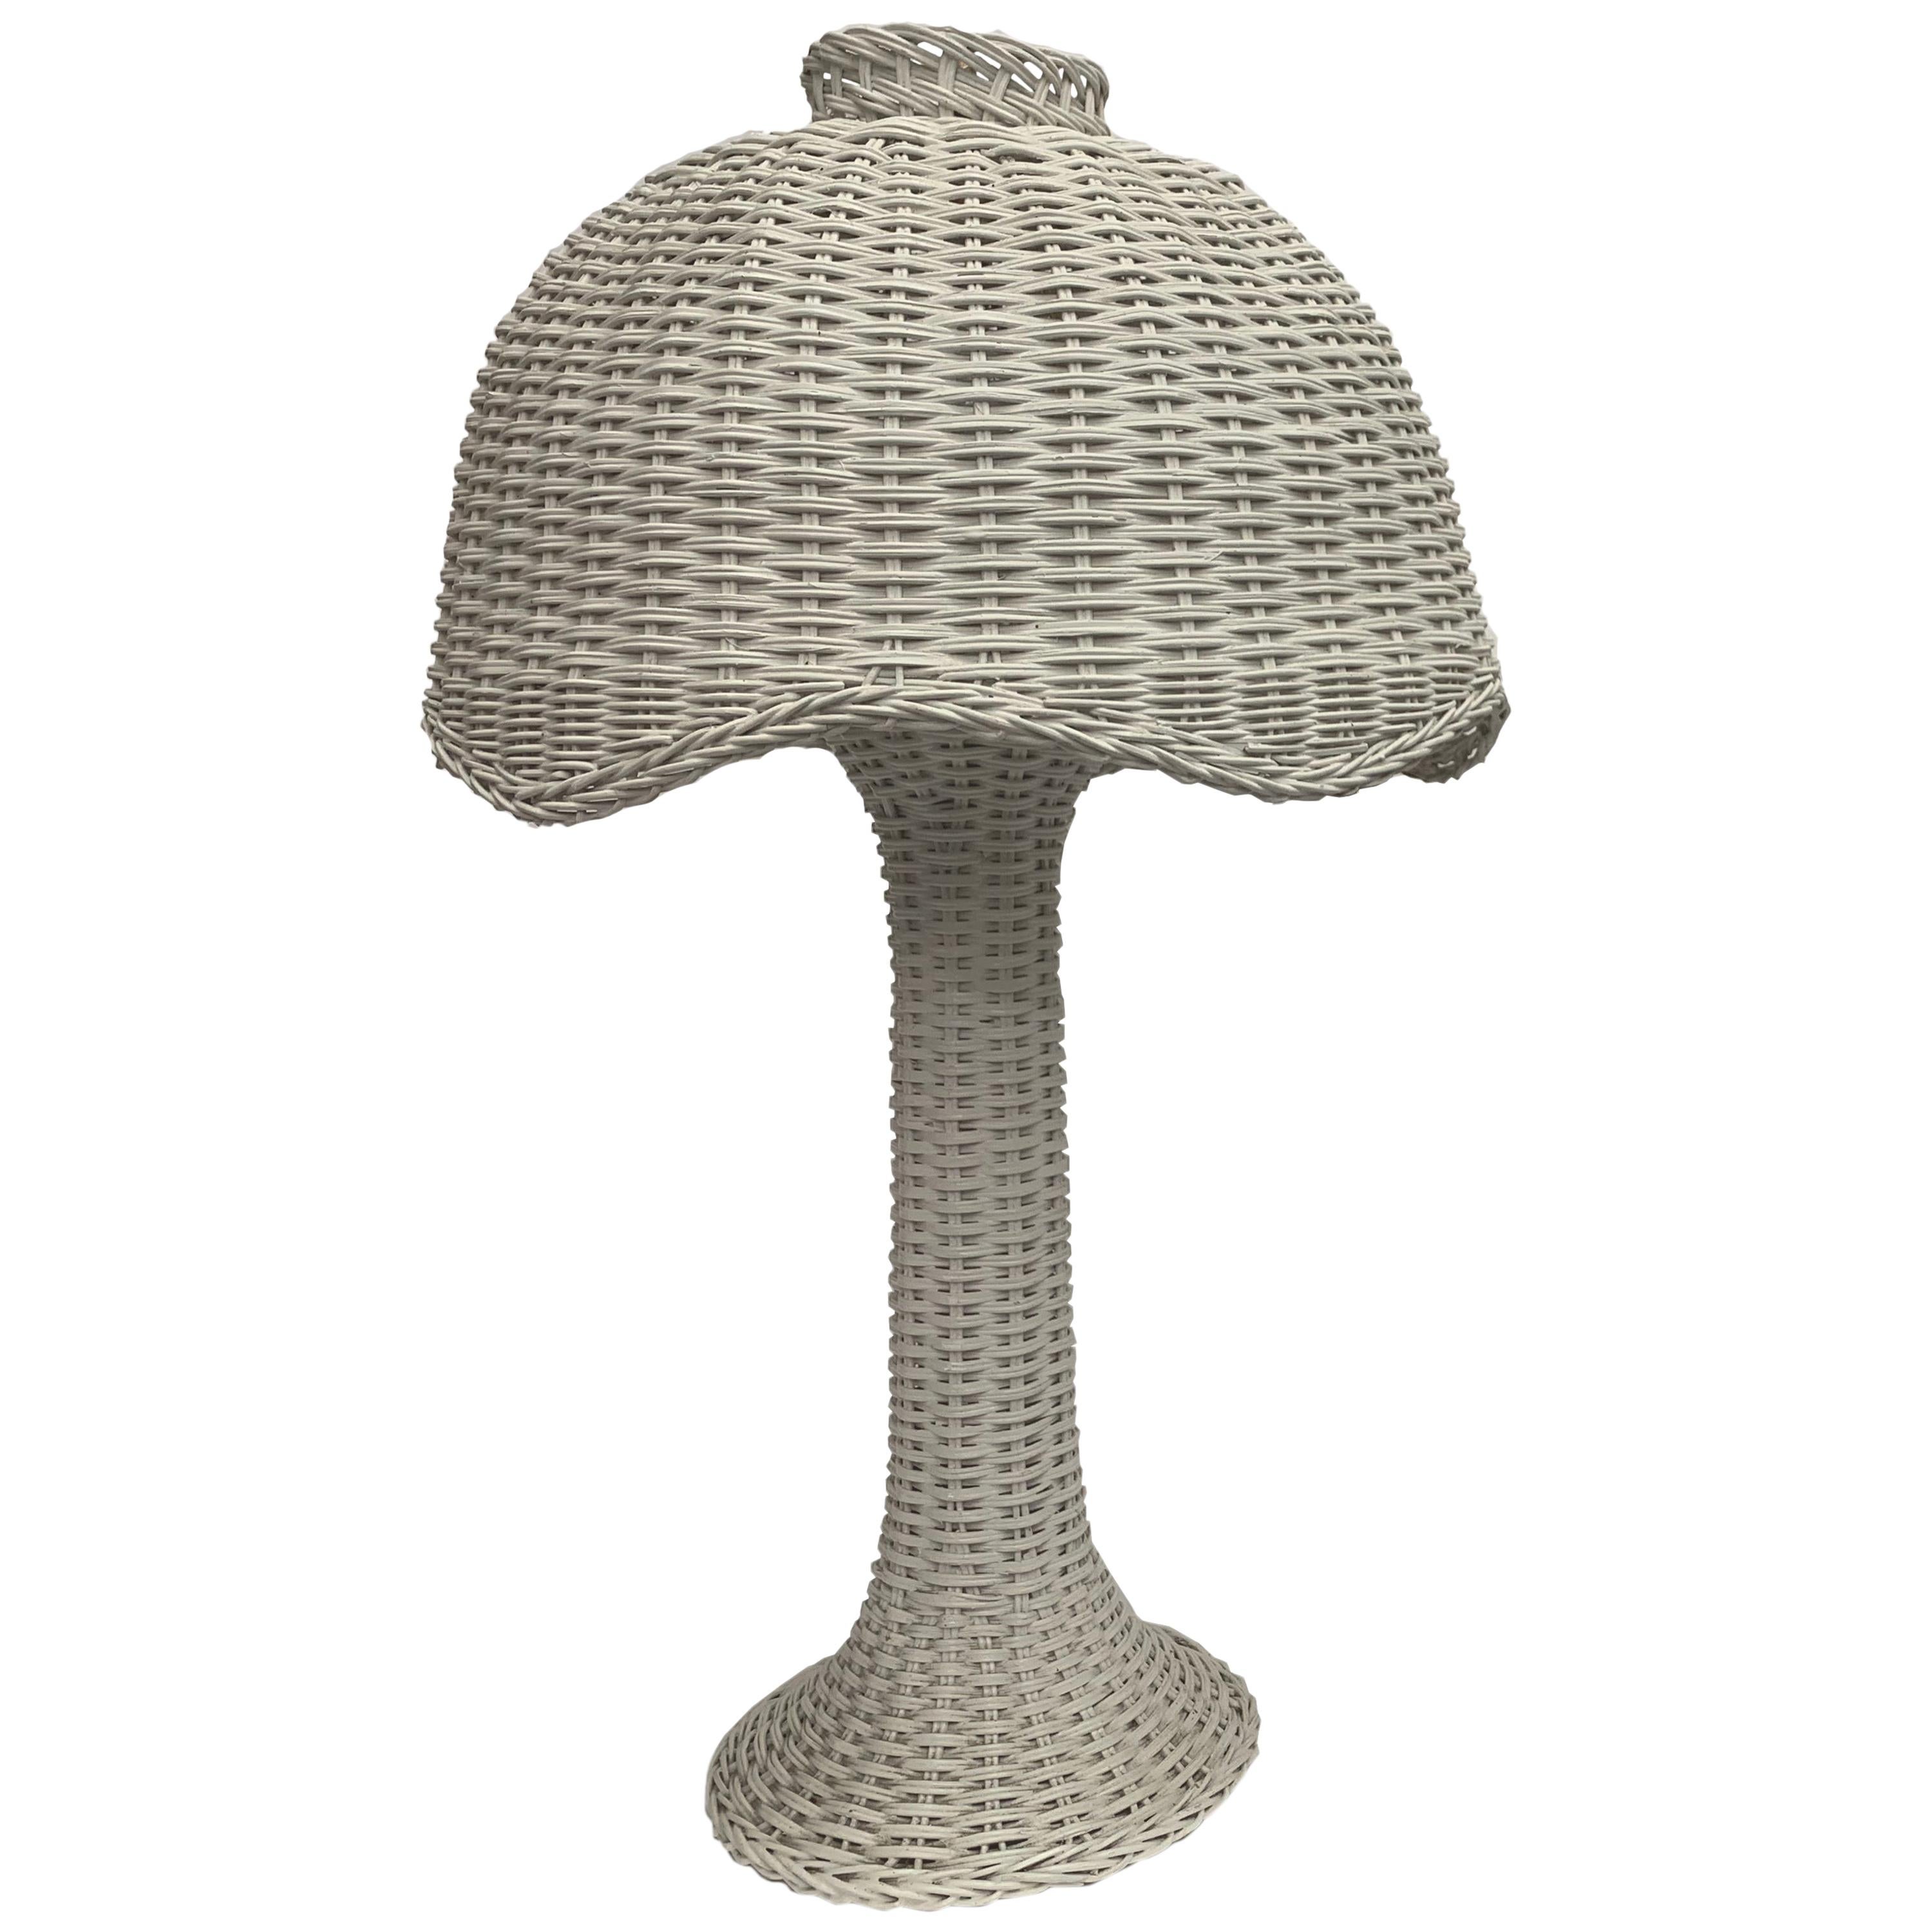 A pair of white wicker lamps with matching scalloped edged shades. 

Property from esteemed interior designer Juan Montoya. Juan Montoya is one of the most acclaimed and prolific interior designers in the world today. Juan Montoya was born and spent